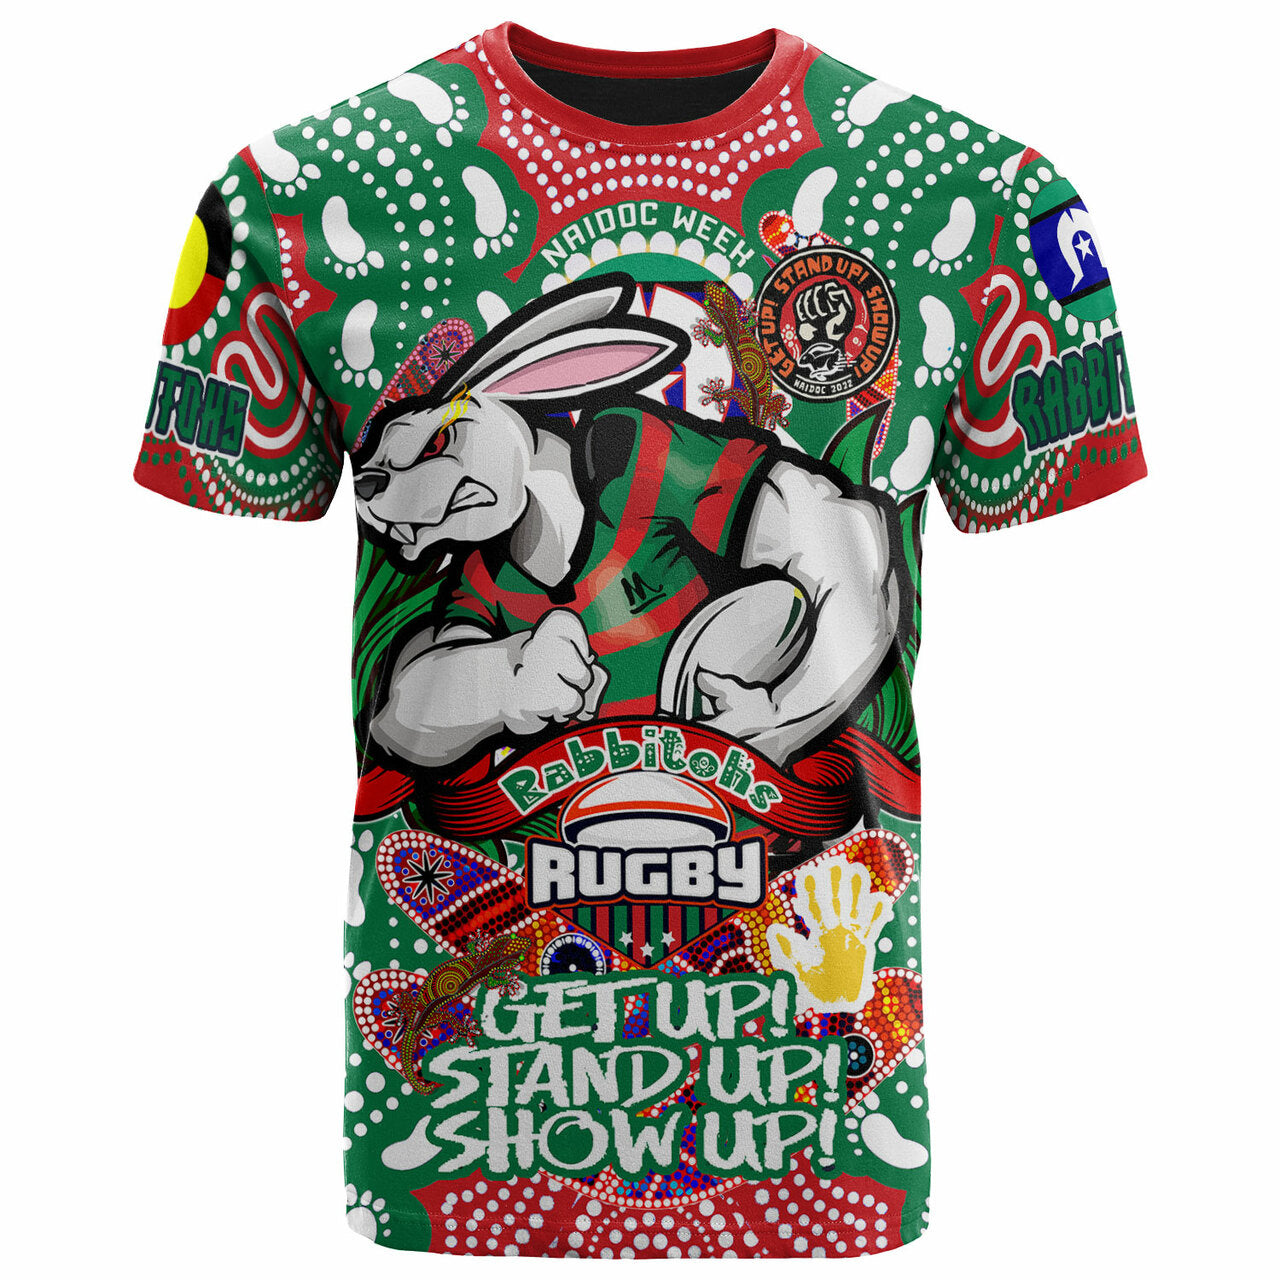 rabbitohs-rugby-naidoc-week-t-shirt-south-sydney-rabbitohs-with-aboriginal-and-torres-strait-islander-culture-rlt12